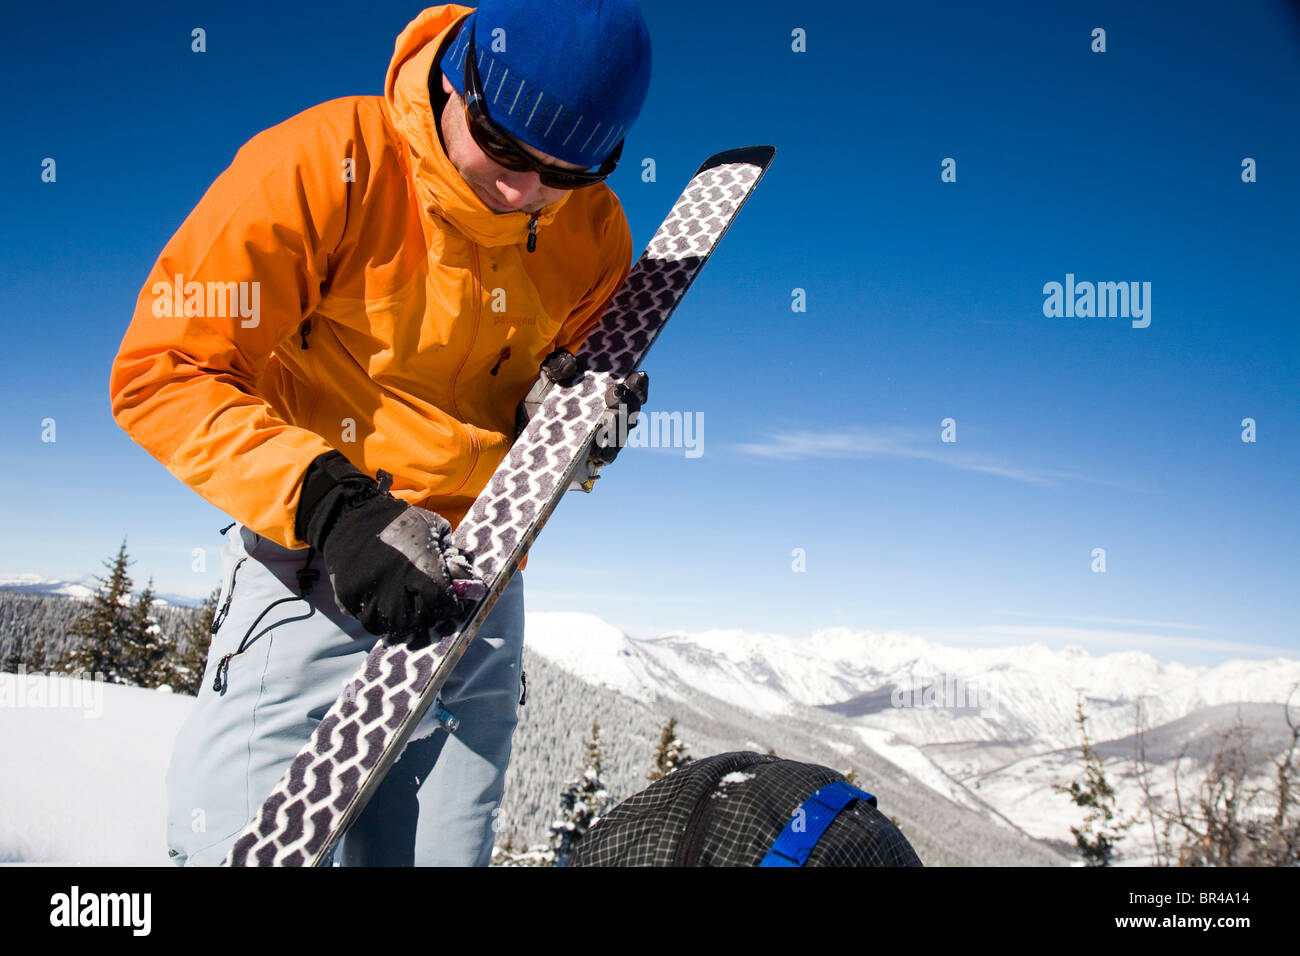 A skier takes a break while backcountry skiing to put the skins on his skis, Colorado. Stock Photo